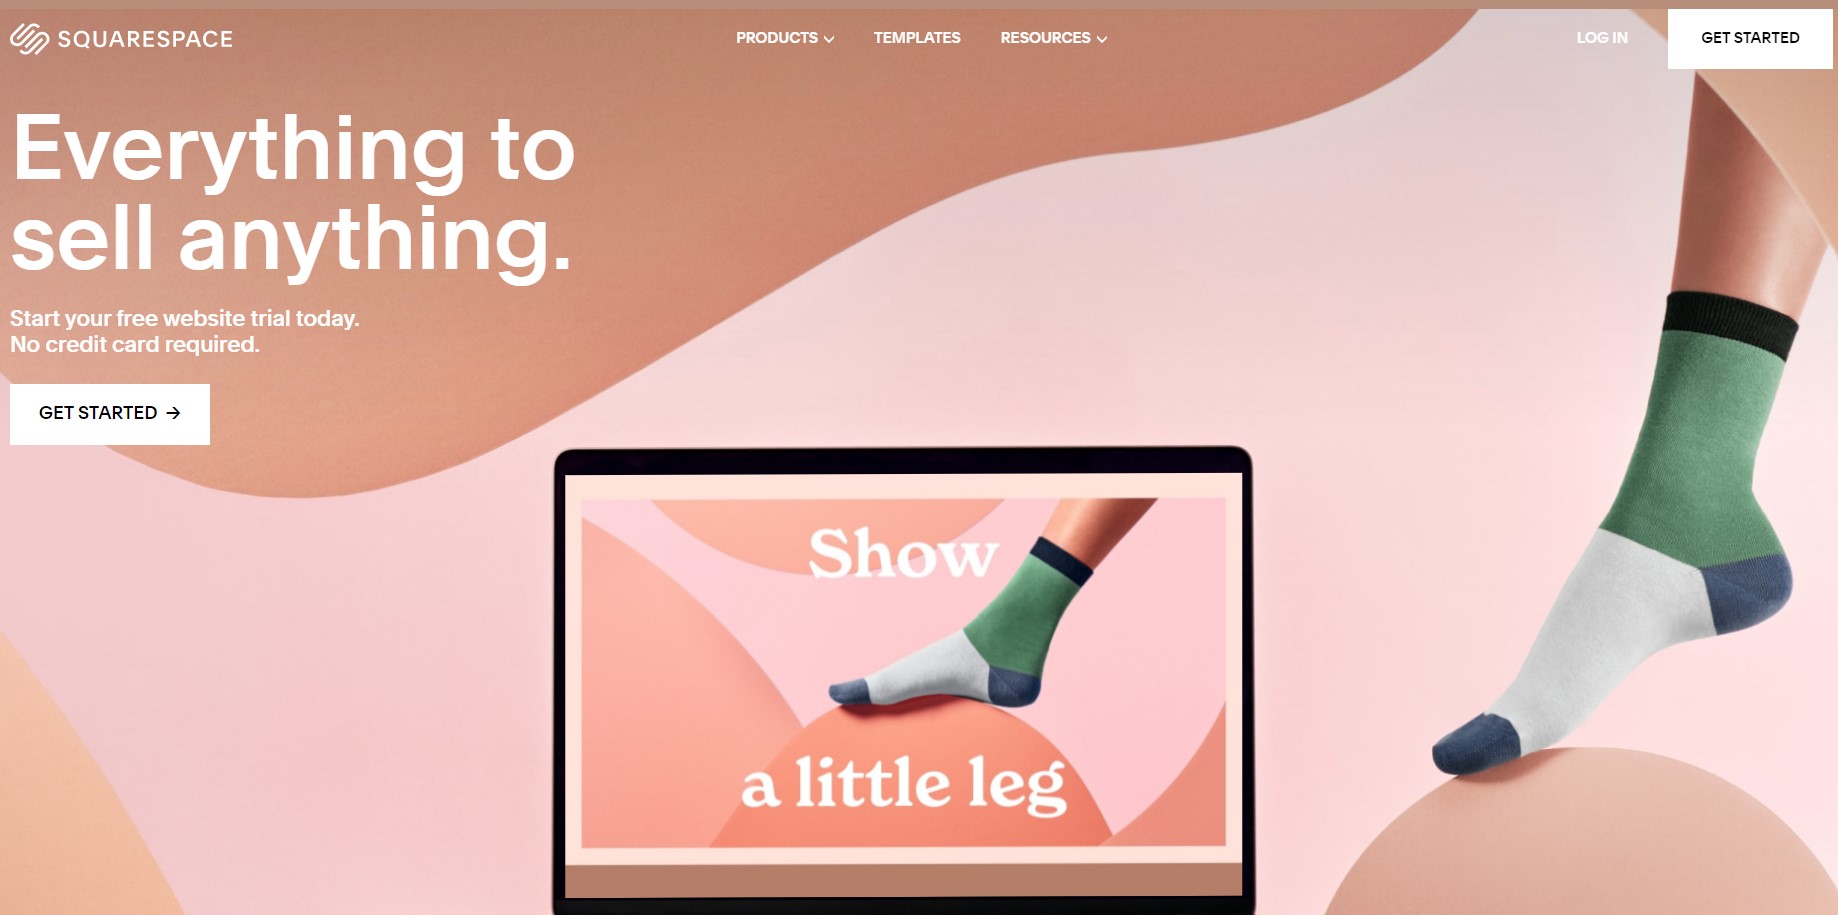 squarespace-is-a-platform-for-creating-a-basic-online-store